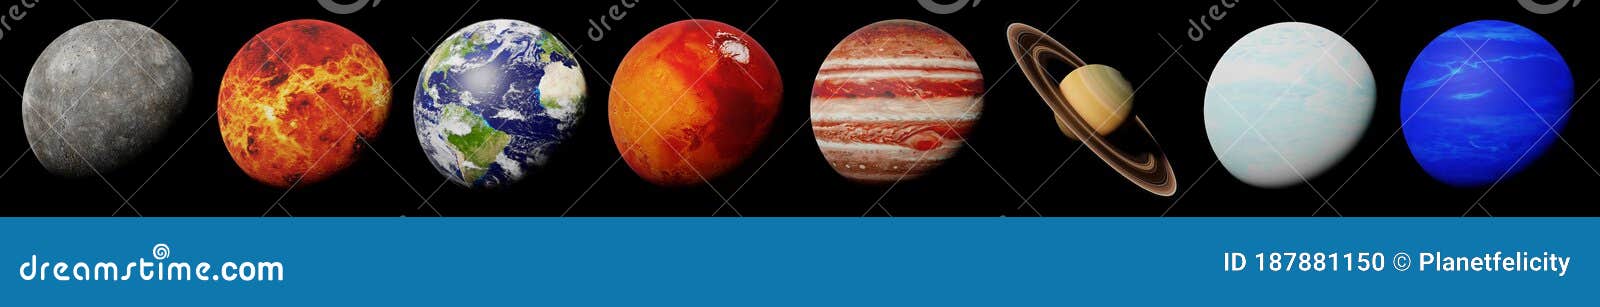 The Planets of the Solar System Isolated on Black Background Stock